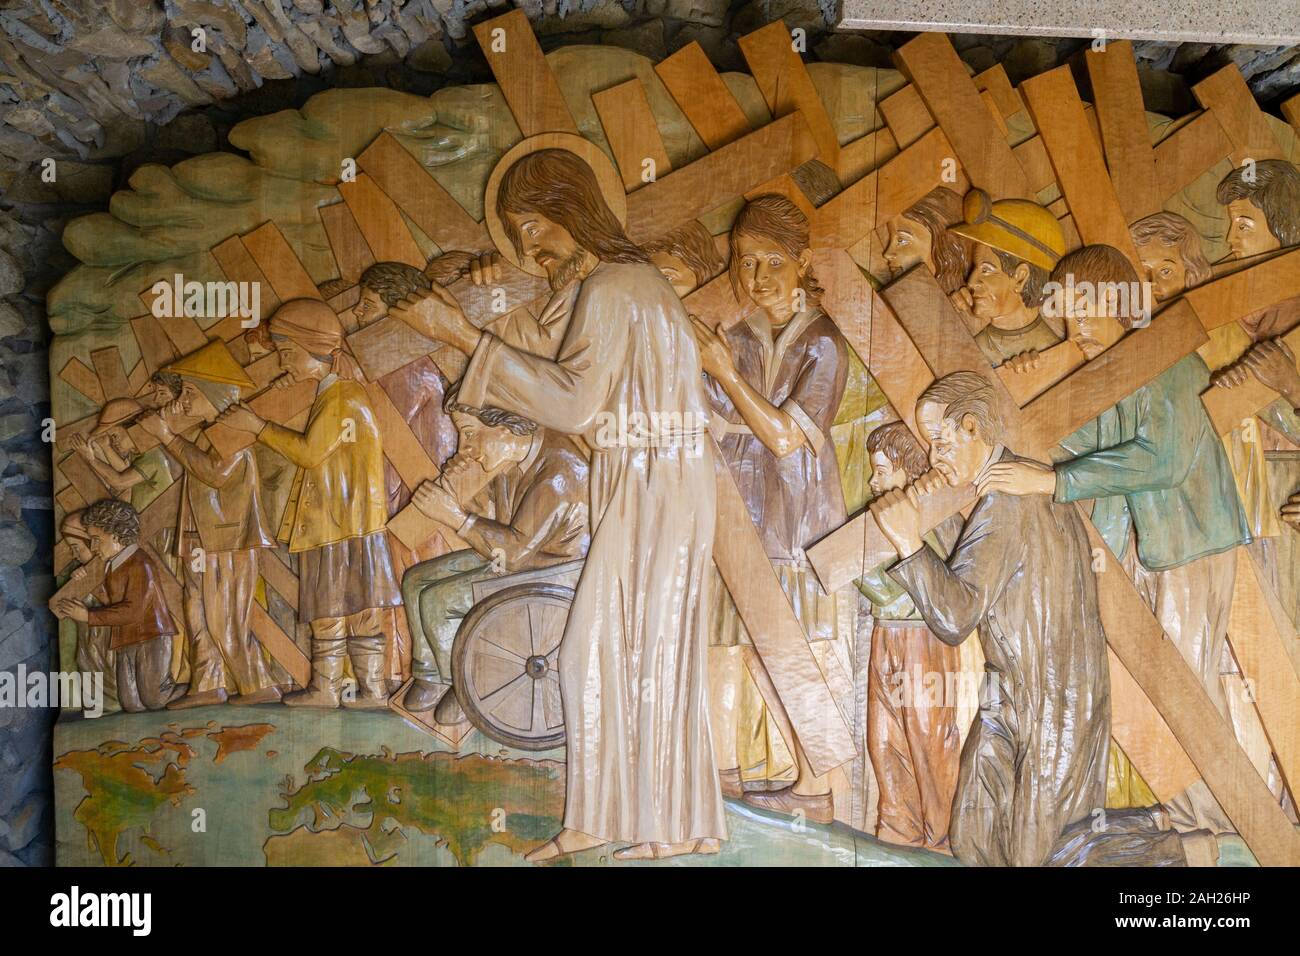 A relief wooden carving of Jesus carrying His cross together with people in all walks of life. The Sanctuary of Our Lady of Tylicz. Stock Photo